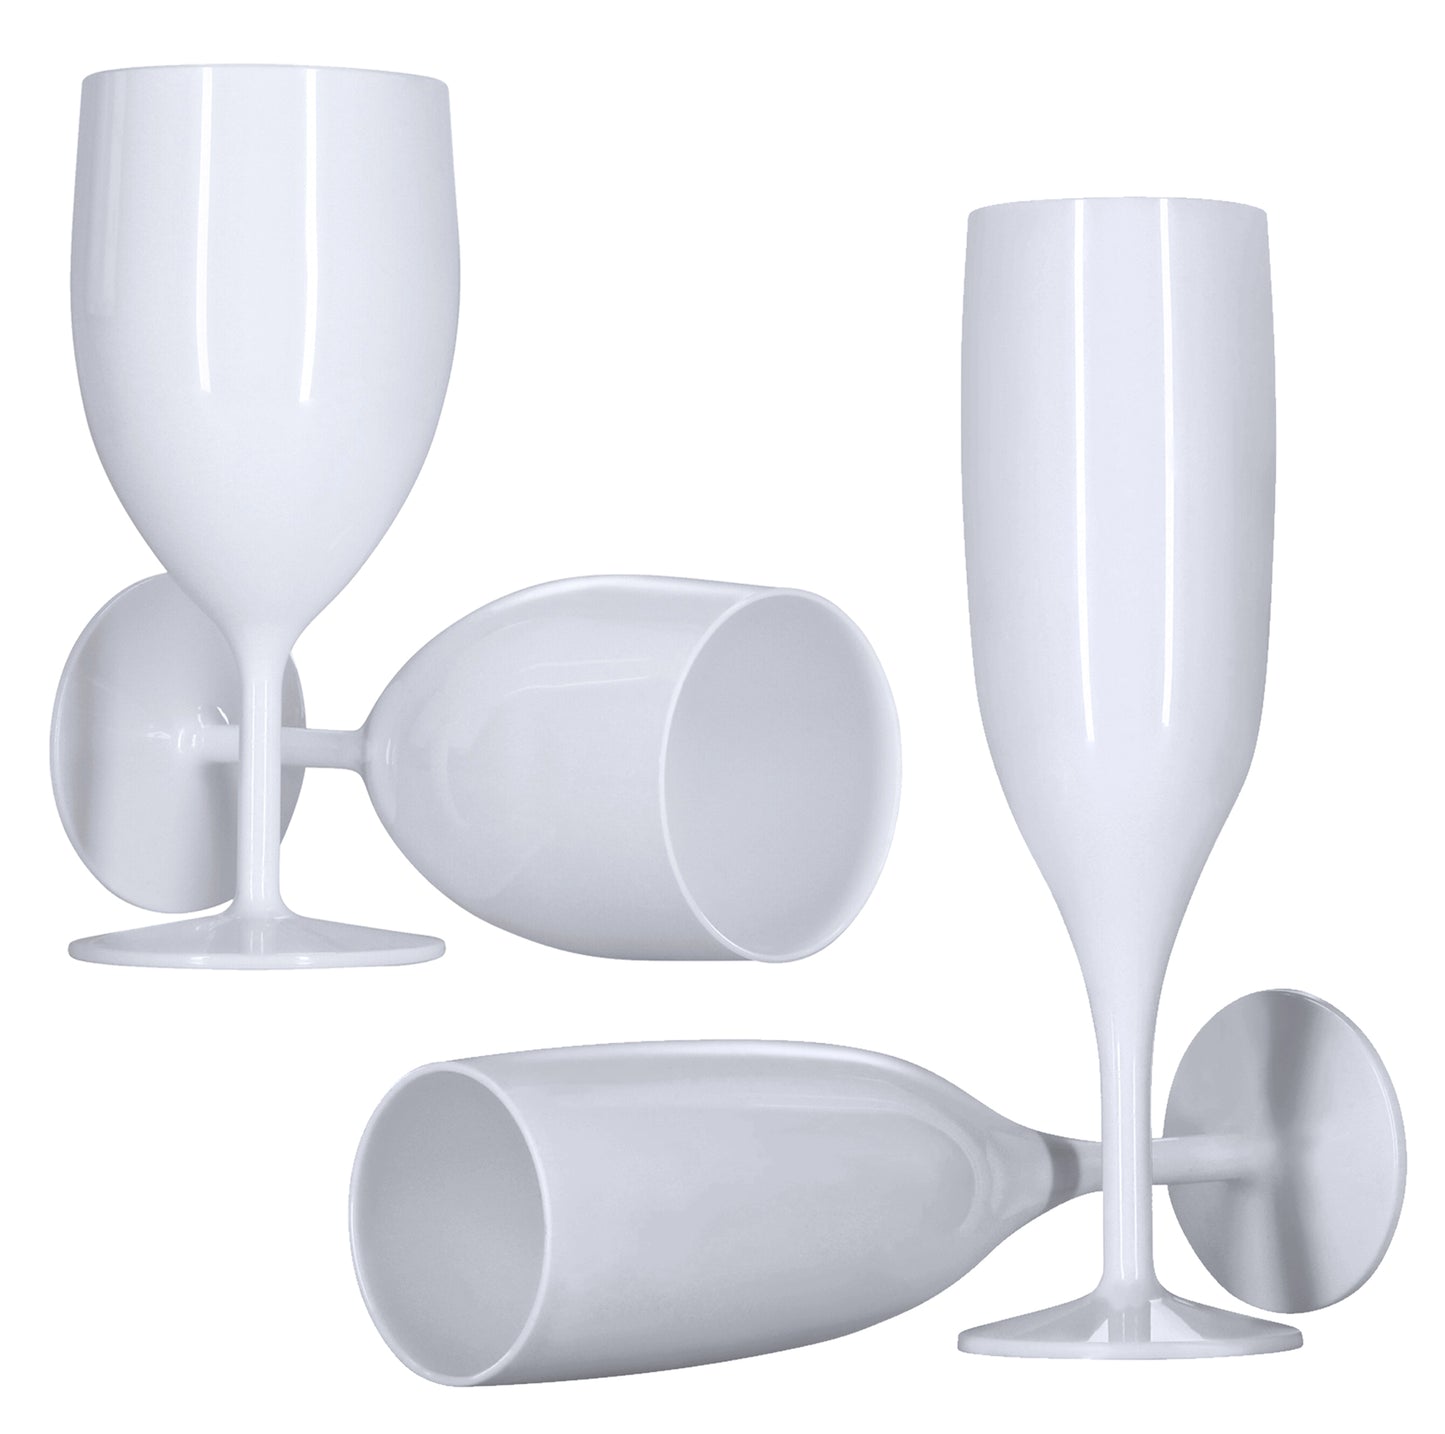 12 Flutes, 12 Wine Glasses (White) Pack of 24 Reusable Plastic Champagne Prosecco 175ml 300ml Strong Glossy Bright 1-Piece Dishwasher Safe-5056020186304-EY-PP-085-Product Pro-Flutes, White, White Champagne Glasses, White Prosecco Flutes, White Wine Glasses, Wine Glasses